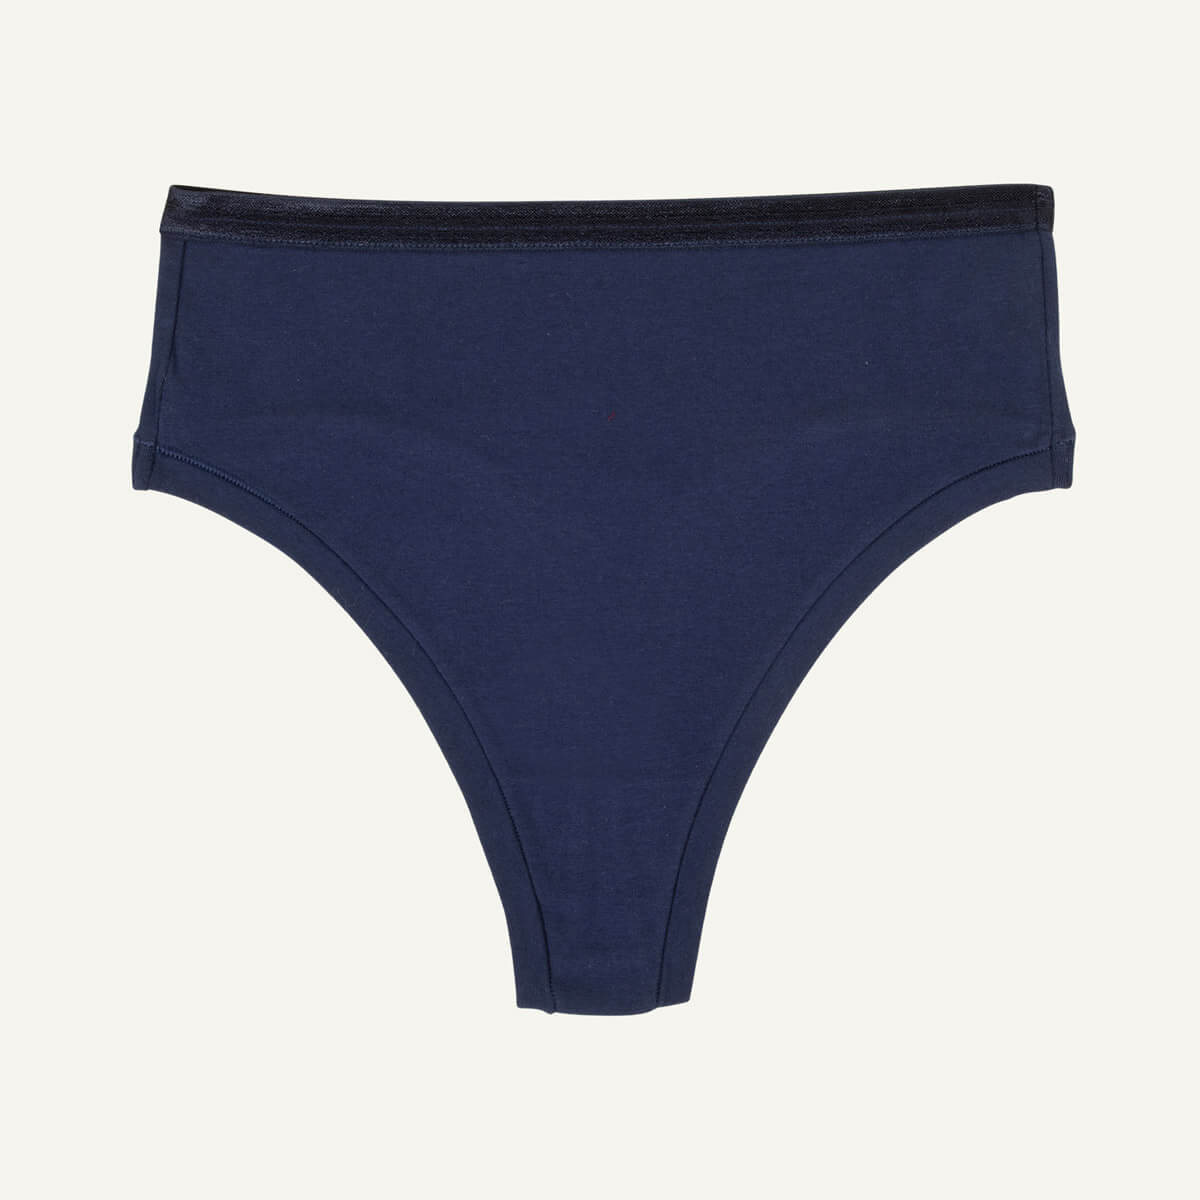 Buy Organic Cotton Seamless High-Rise Tanga, Fast Delivery